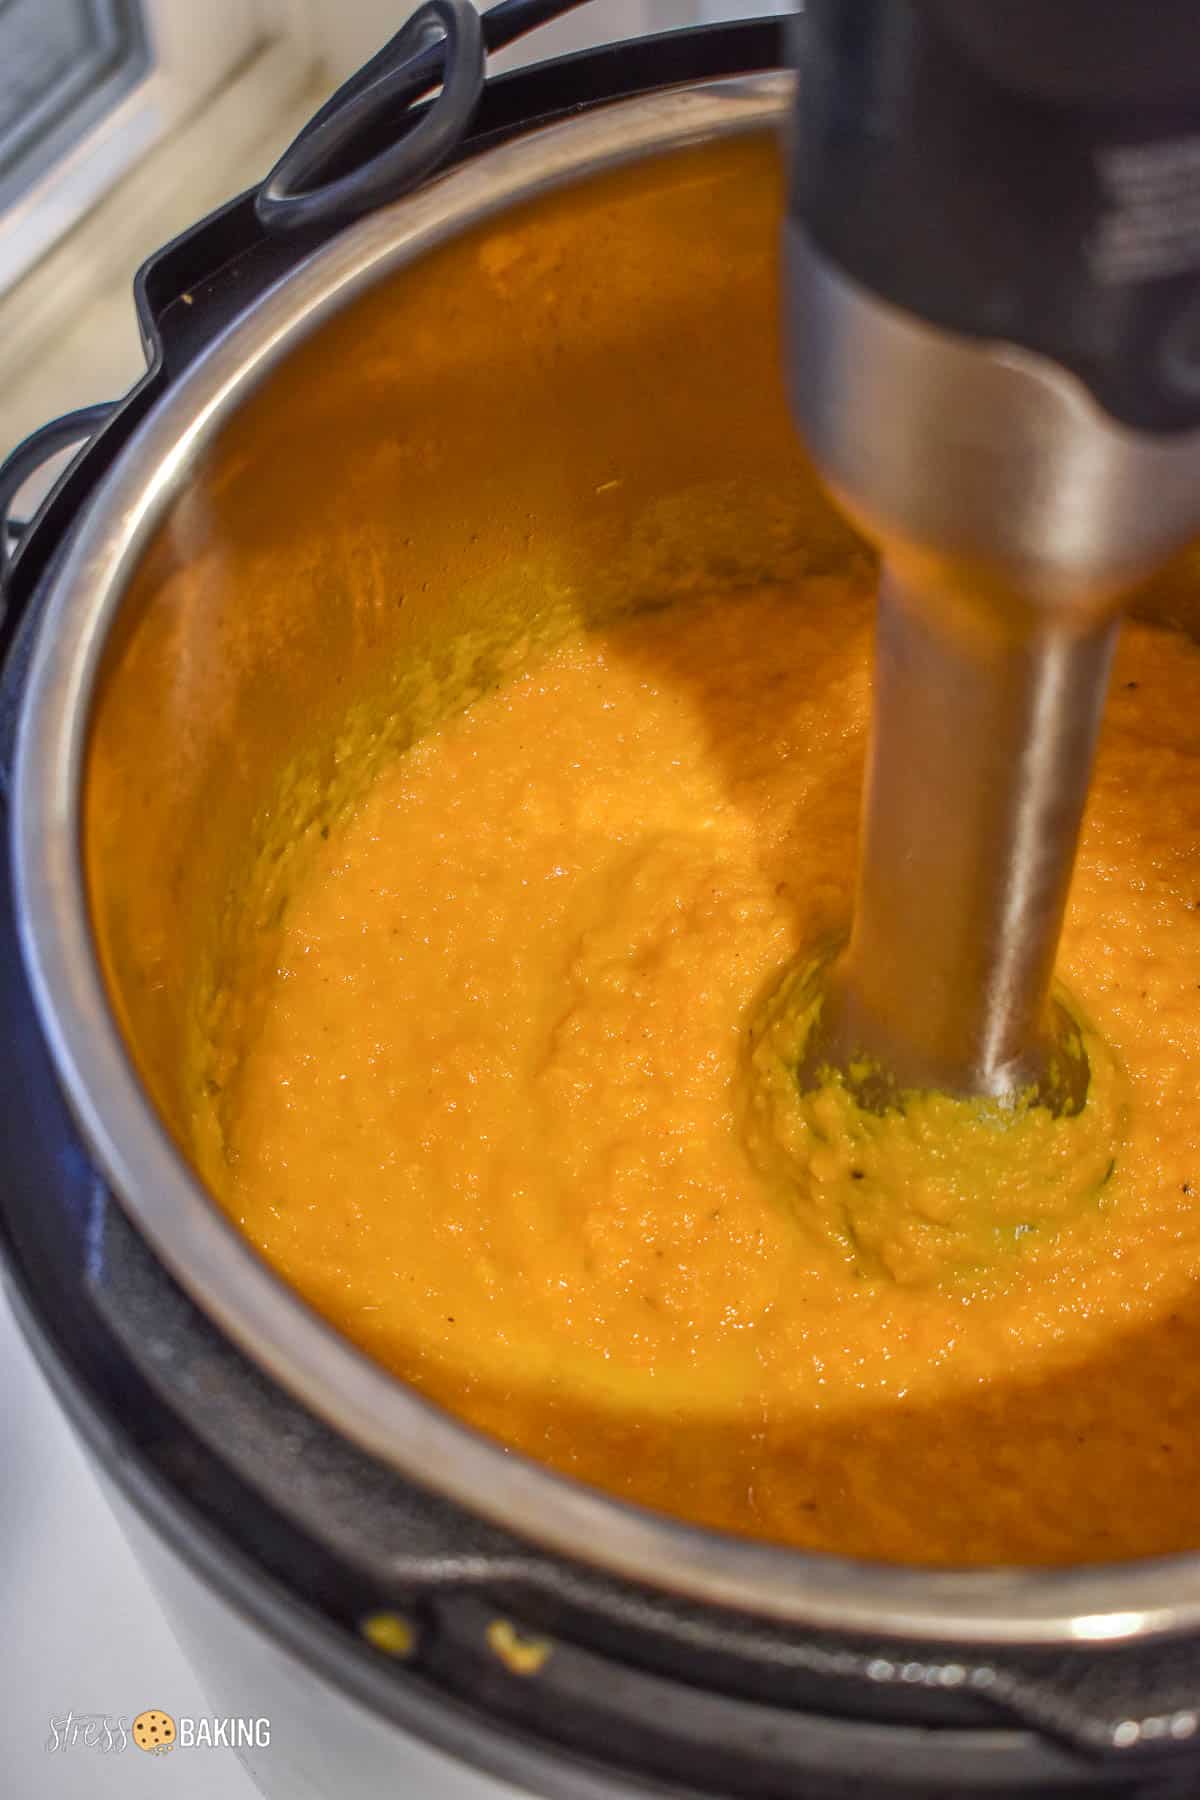 Orange carrot ginger soup being blended with an immersion blender in an Instant Pot